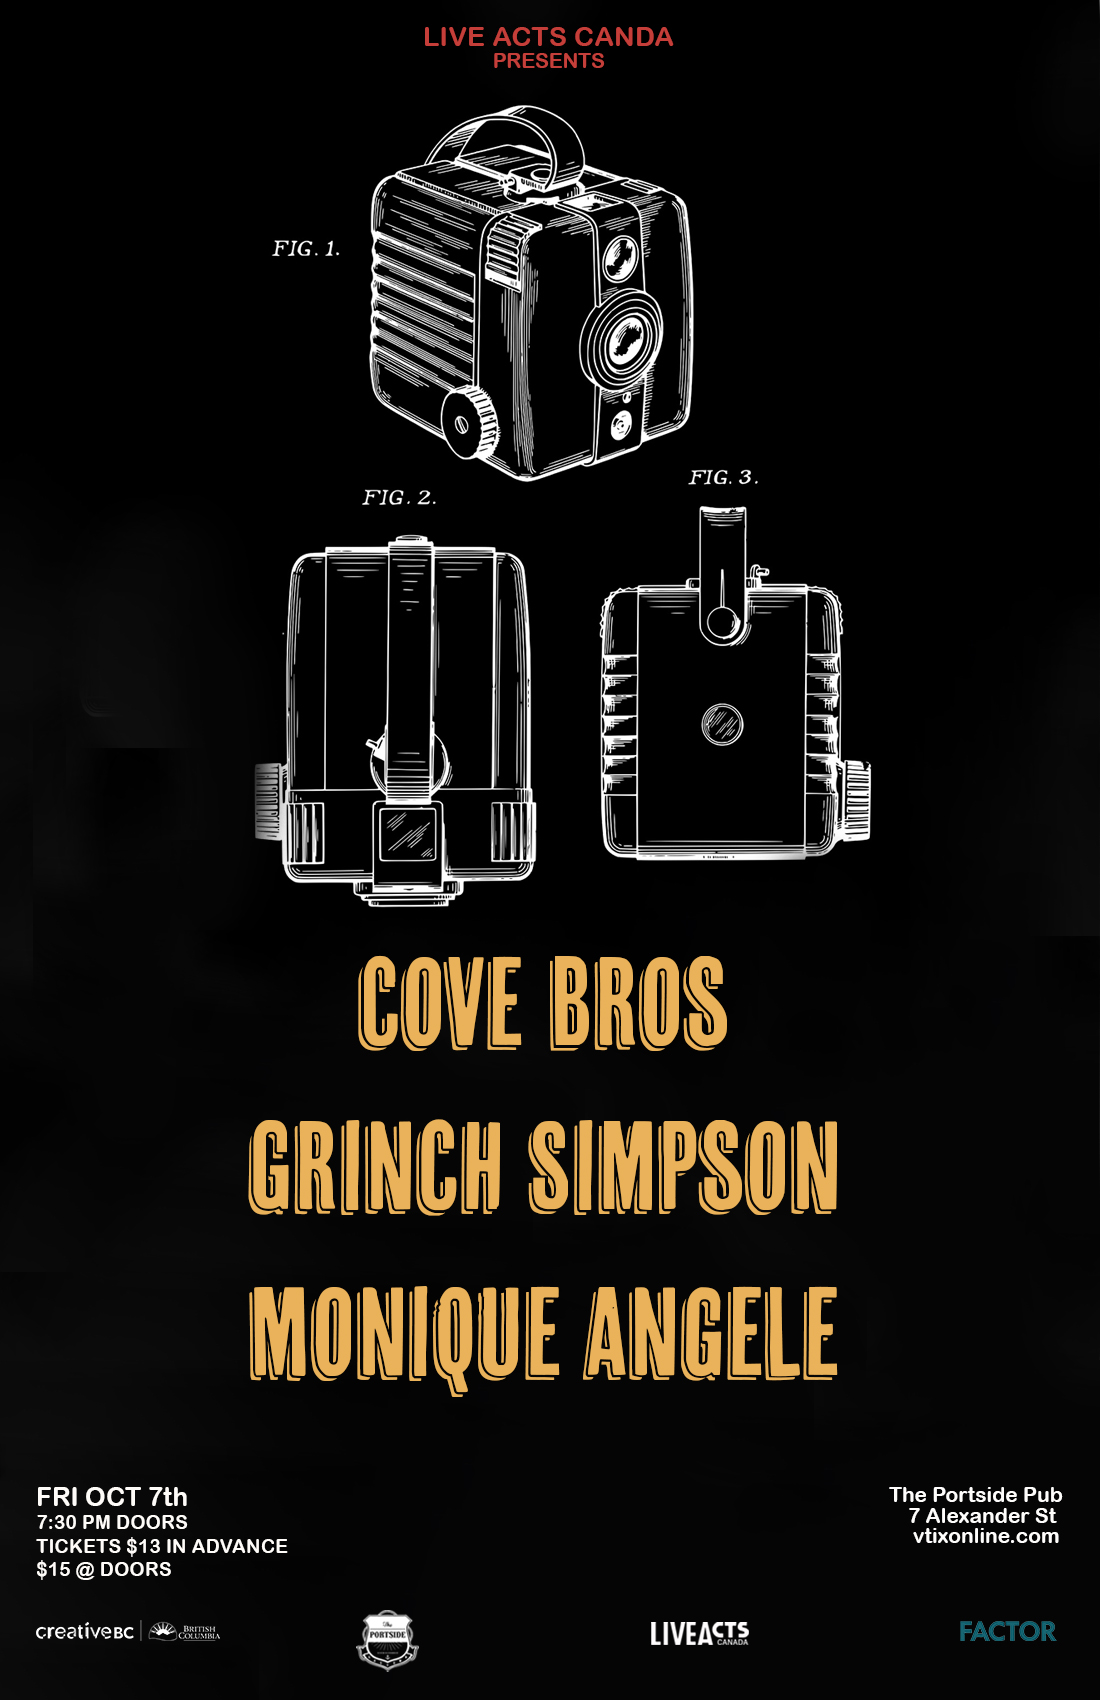 Cove Bros with Special Guests Grinch Simpson and Monique Angele